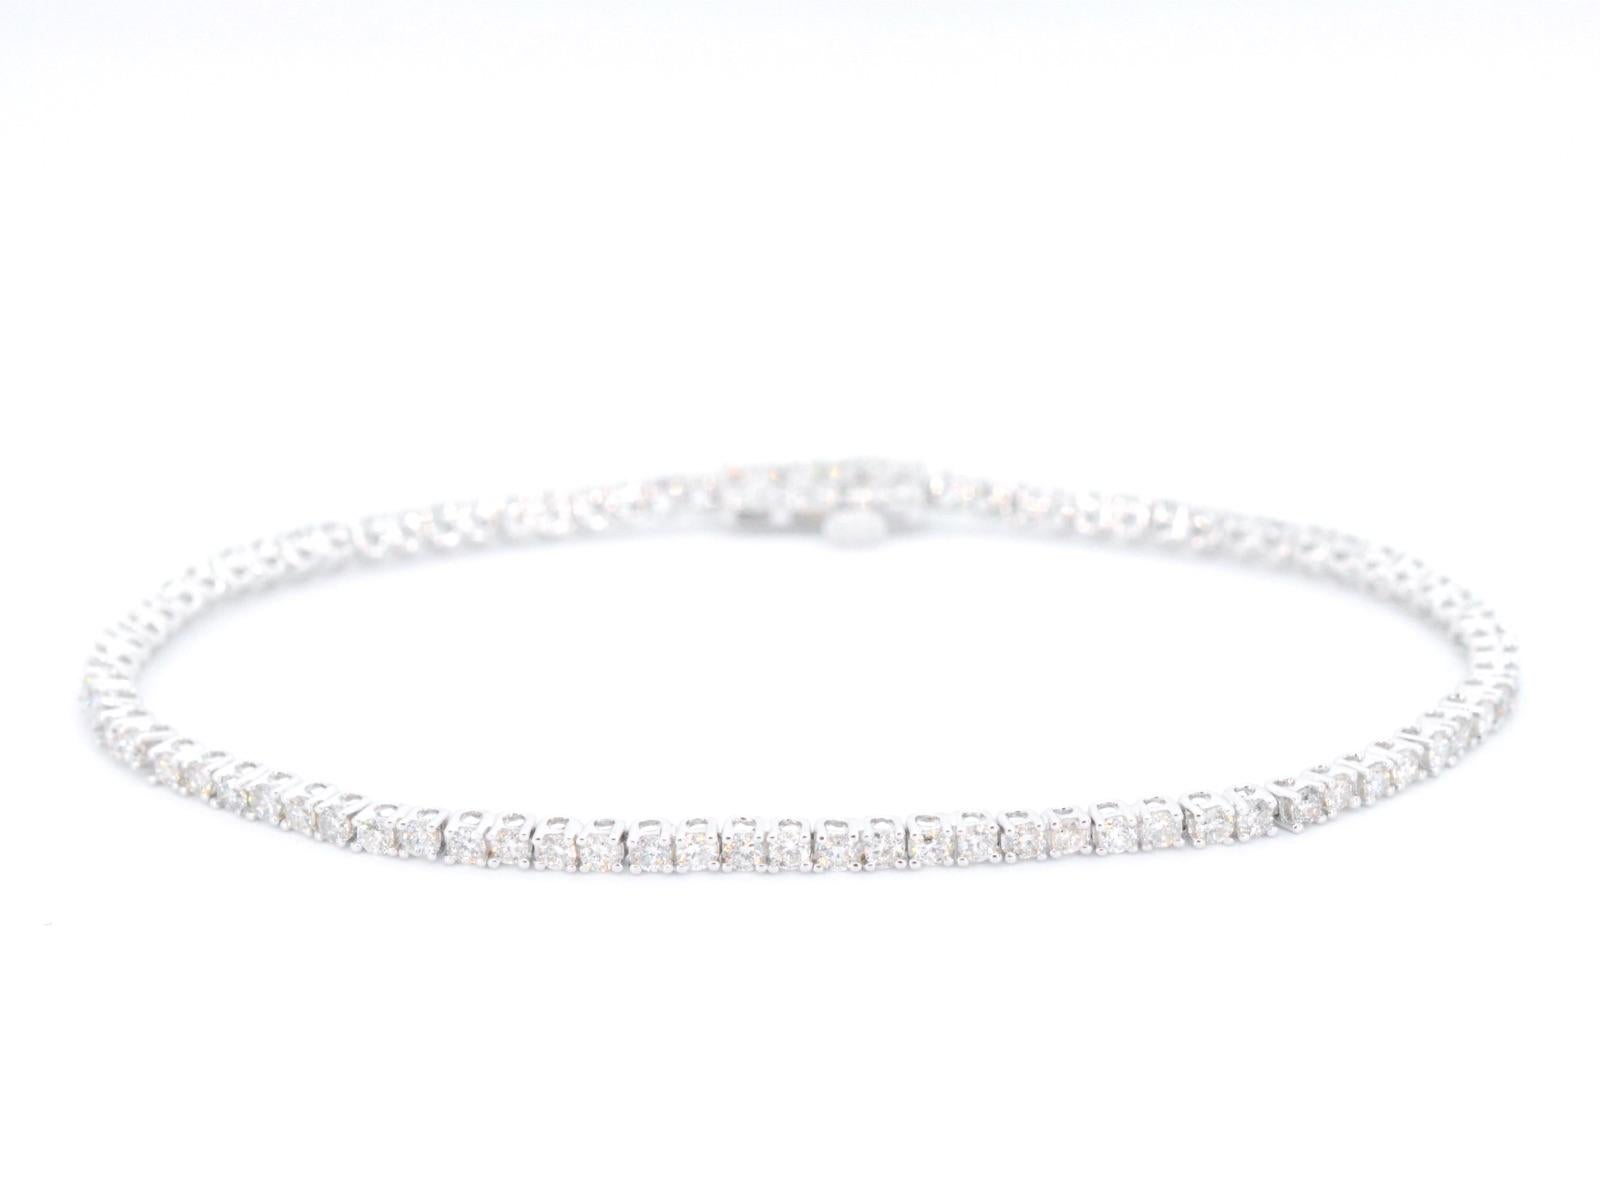 This gorgeous white gold tennis bracelet features 2.50 carats of brilliant cut diamonds, providing incredible sparkle and fire. The diamonds are set in a classic prong setting, ensuring they are secure while still allowing for maximum light